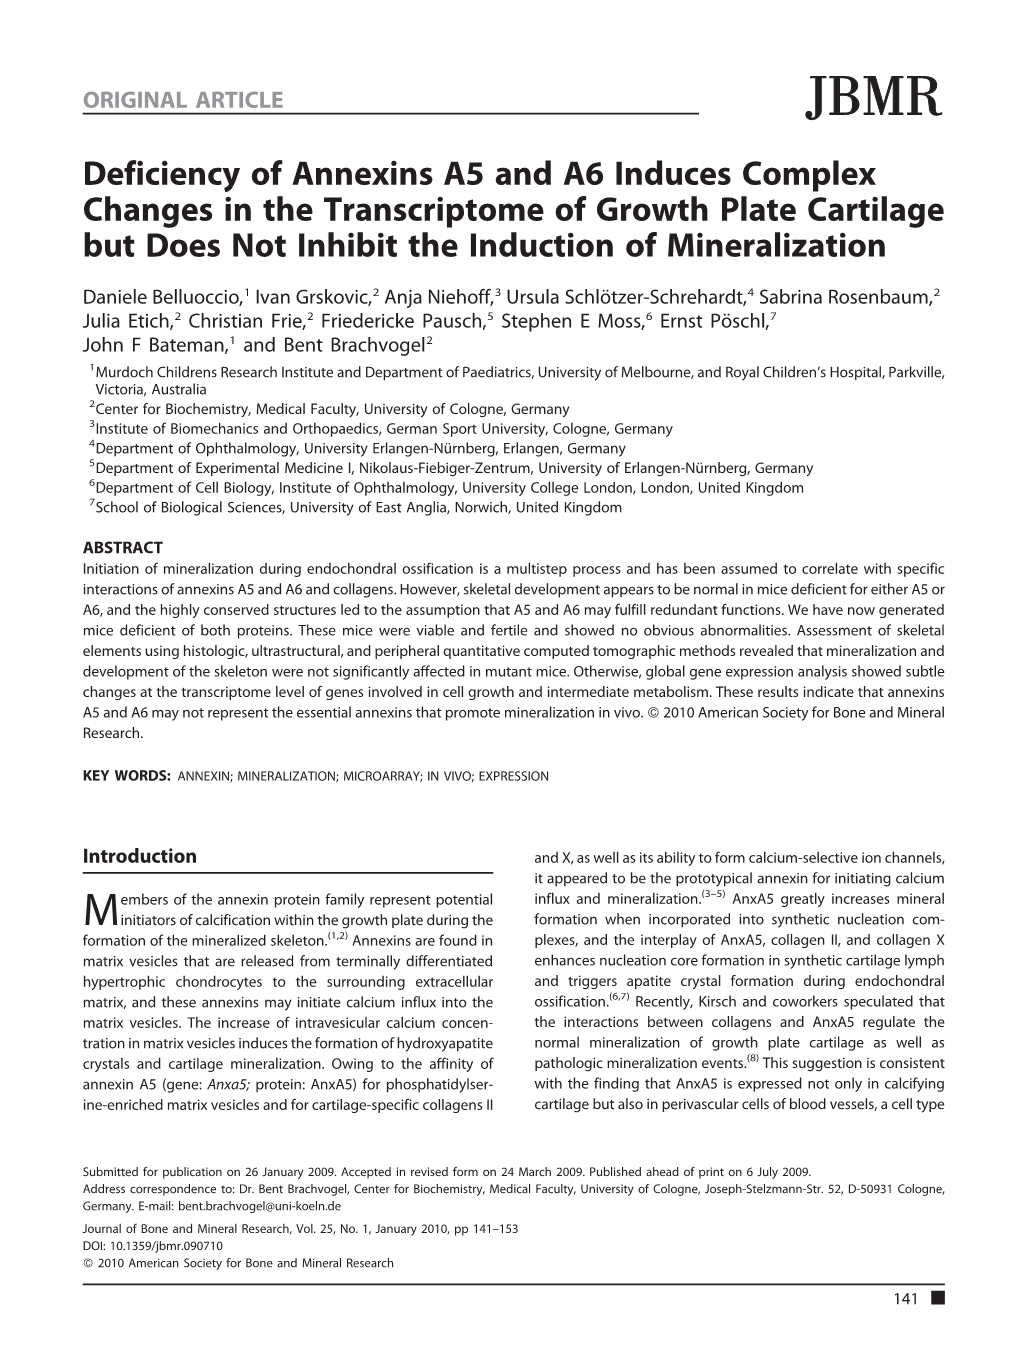 Deficiency of Annexins A5 and A6 Induces Complex Changes in the Transcriptome of Growth Plate Cartilage but Does Not Inhibit the Induction of Mineralization